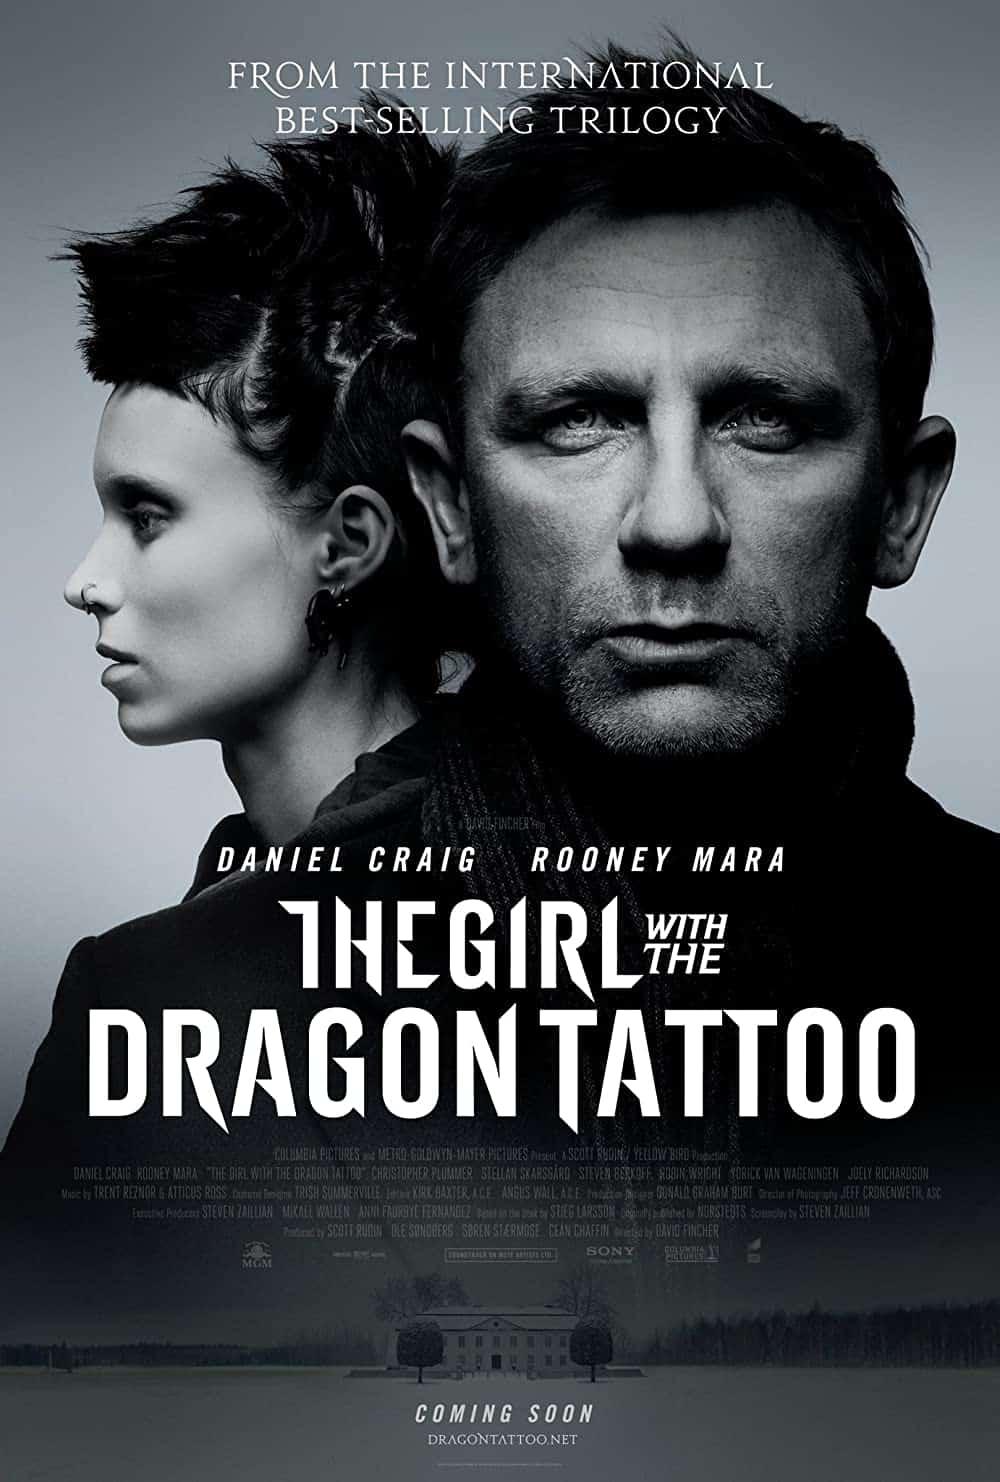 The Girl with the Dragon Tattoo (2011)